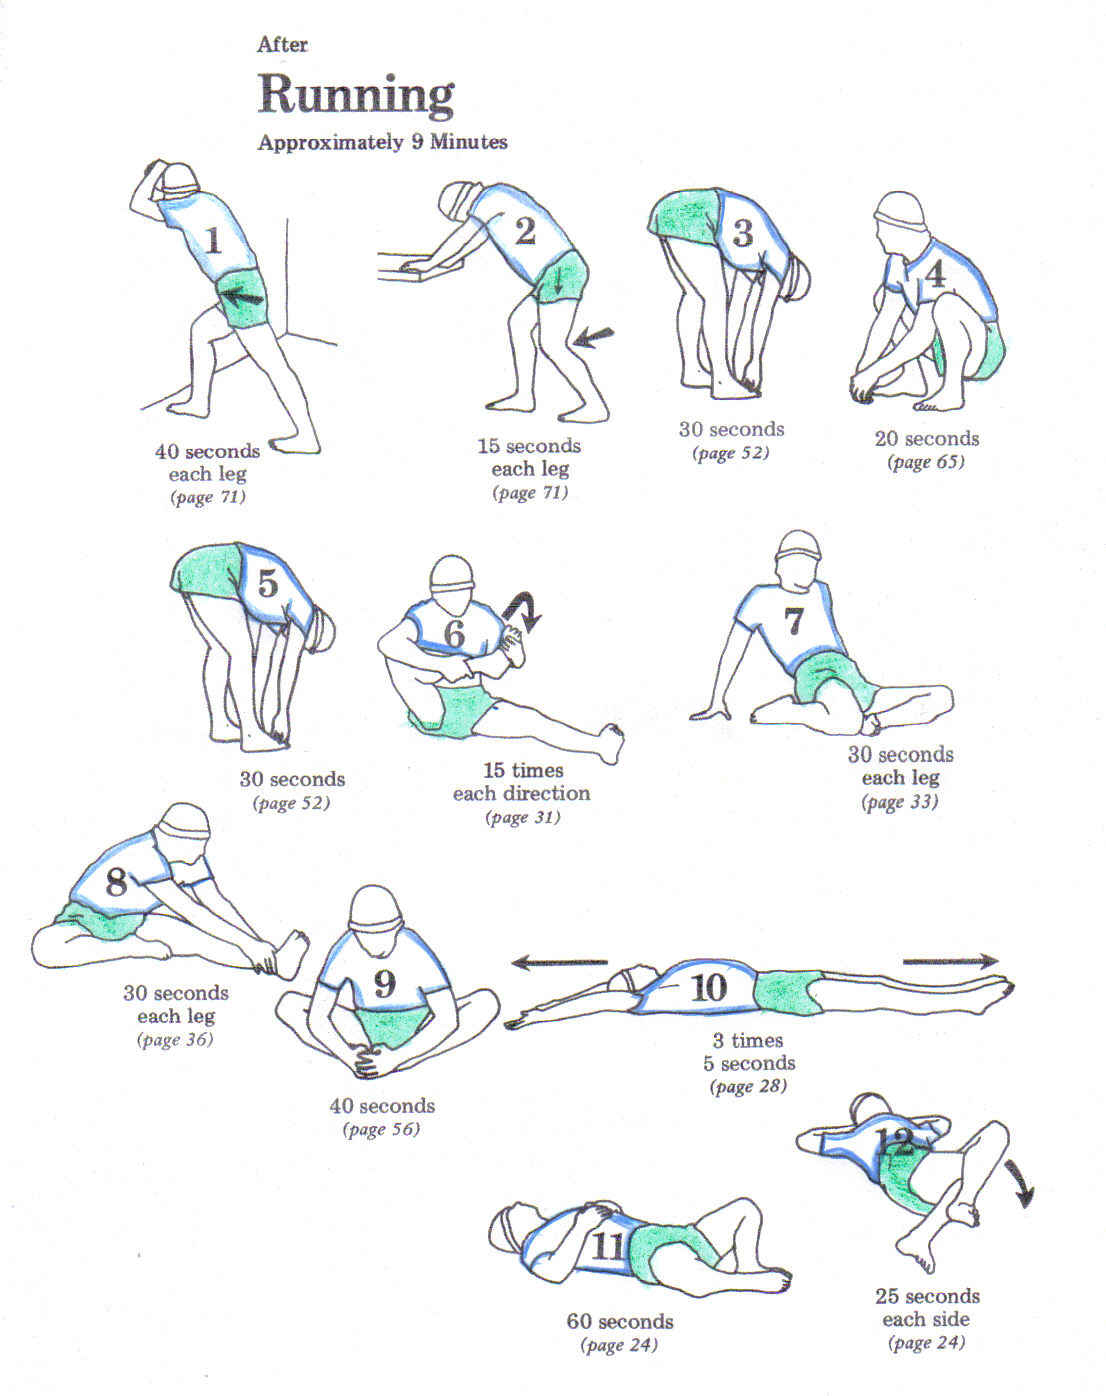 How to Stretch after Running